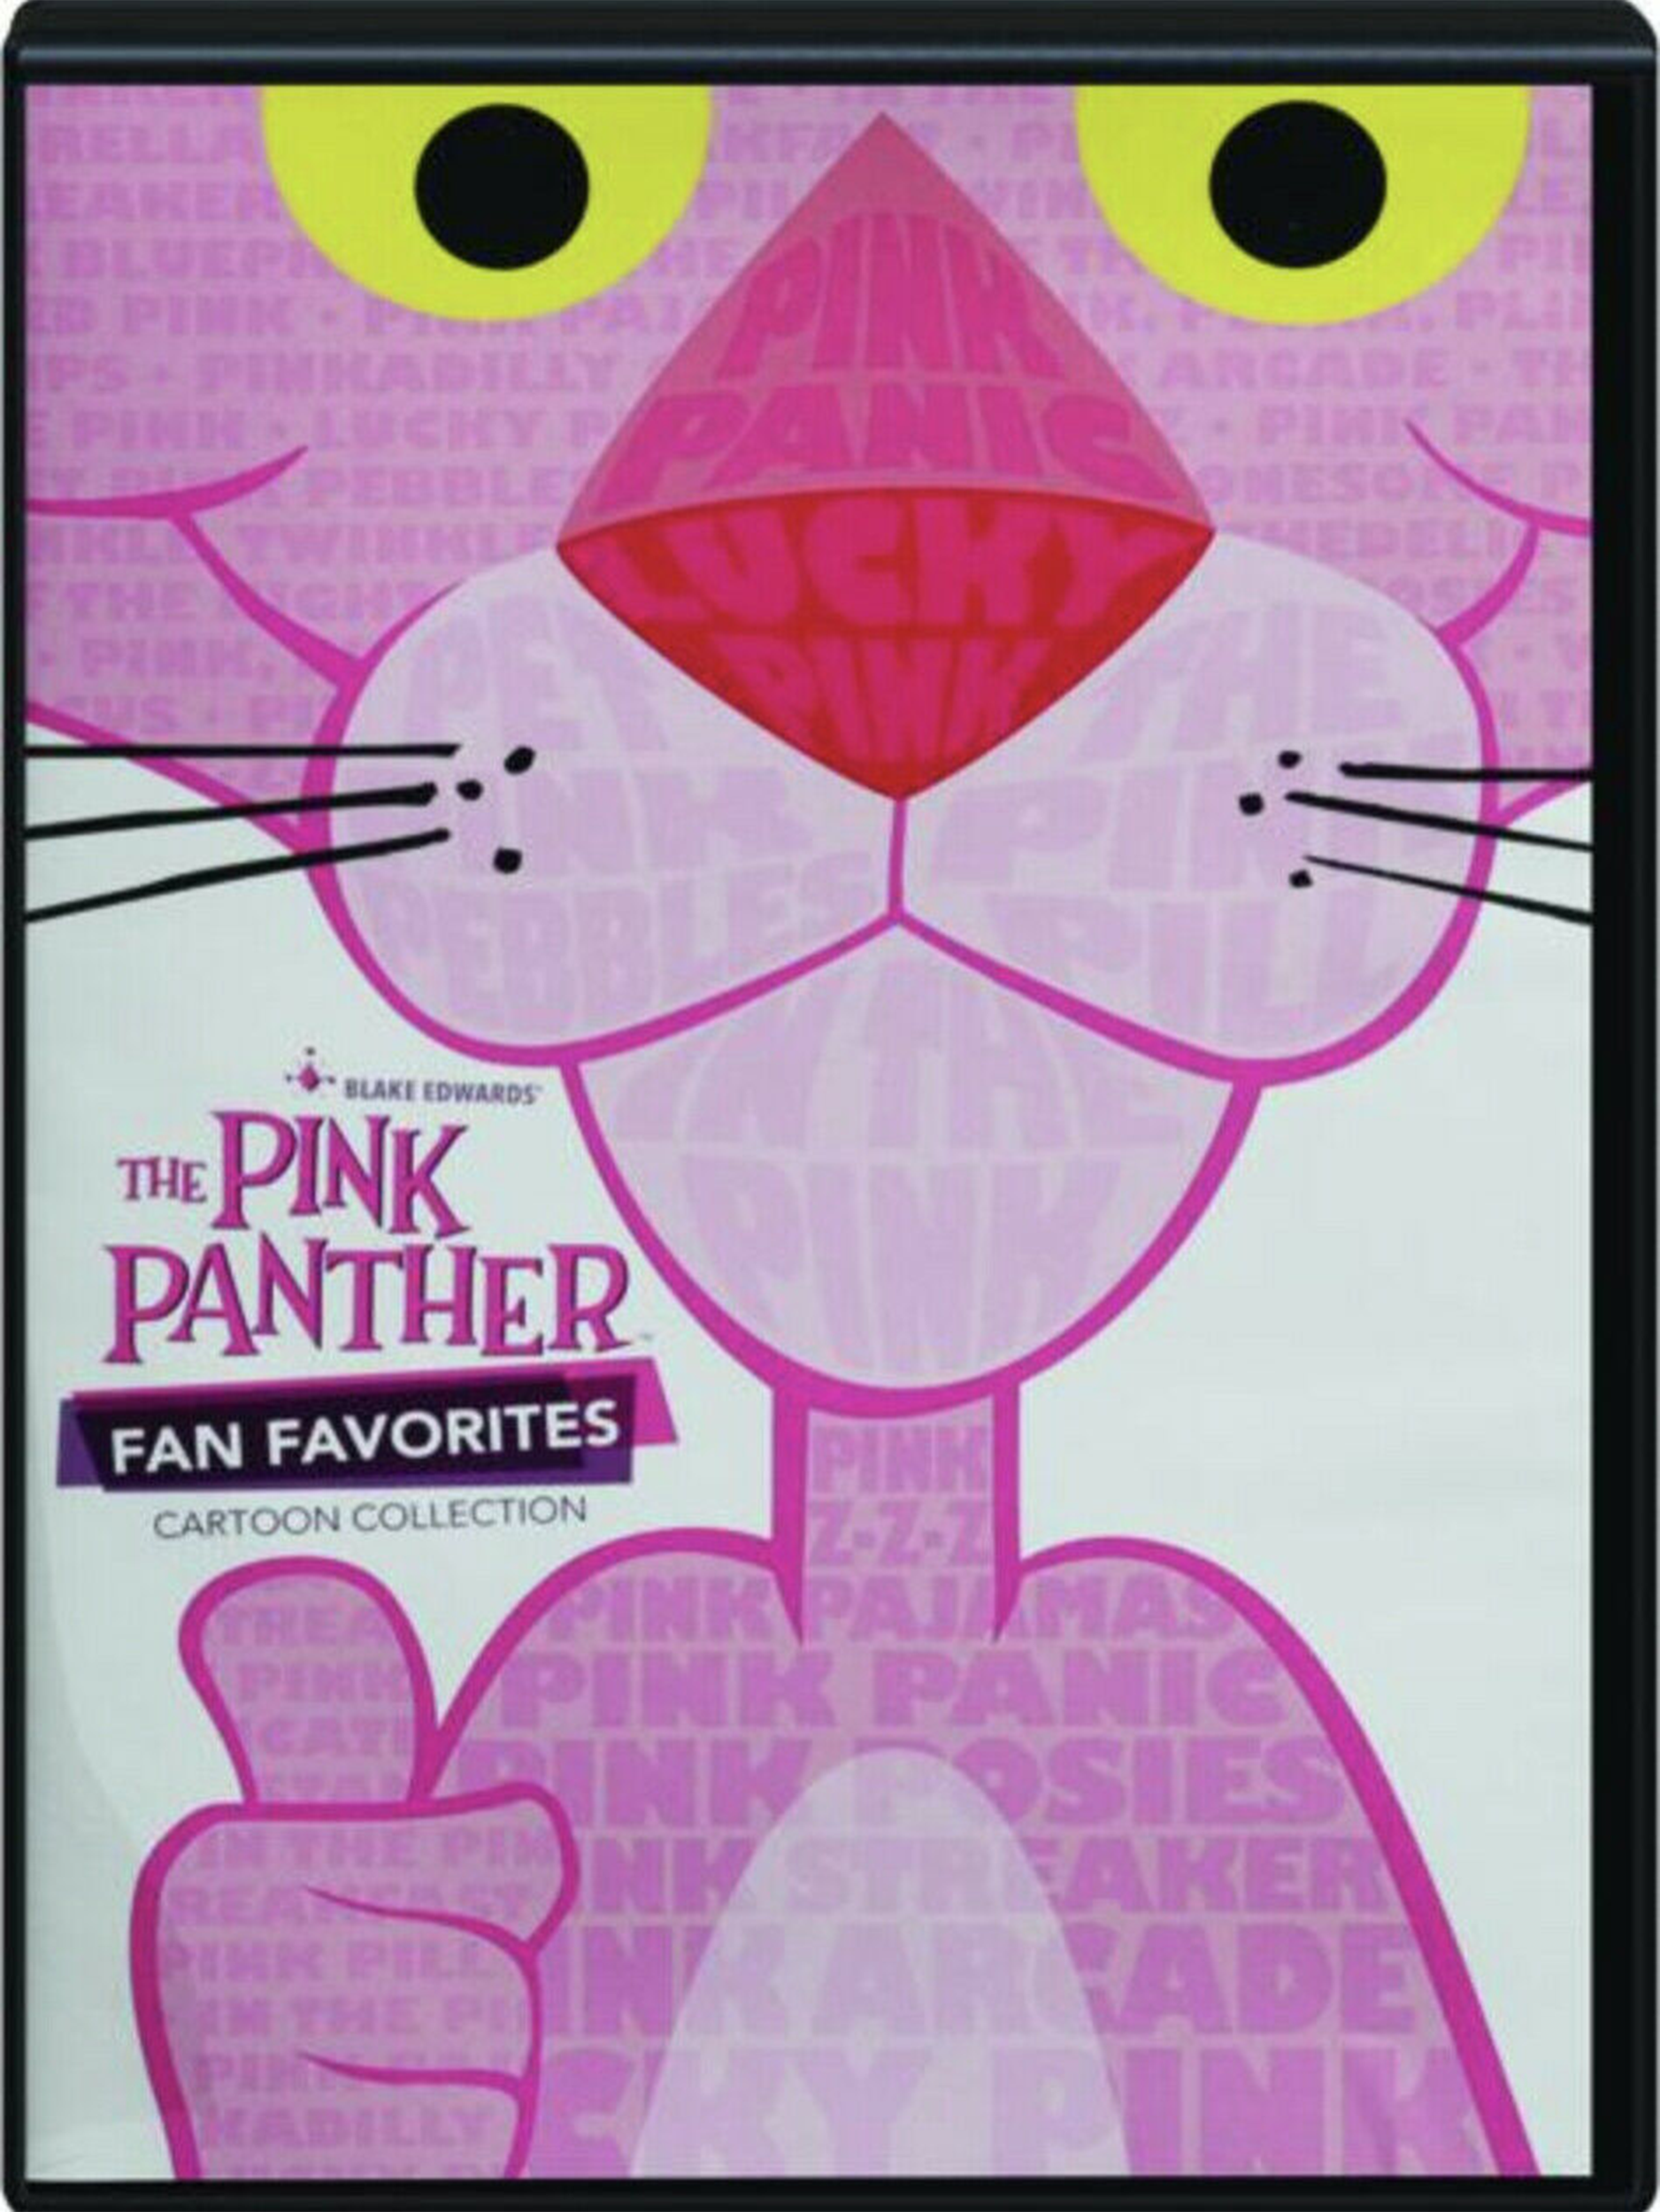 Best Buy: The Pink Panther Classic Cartoon Collection [Blu-ray]